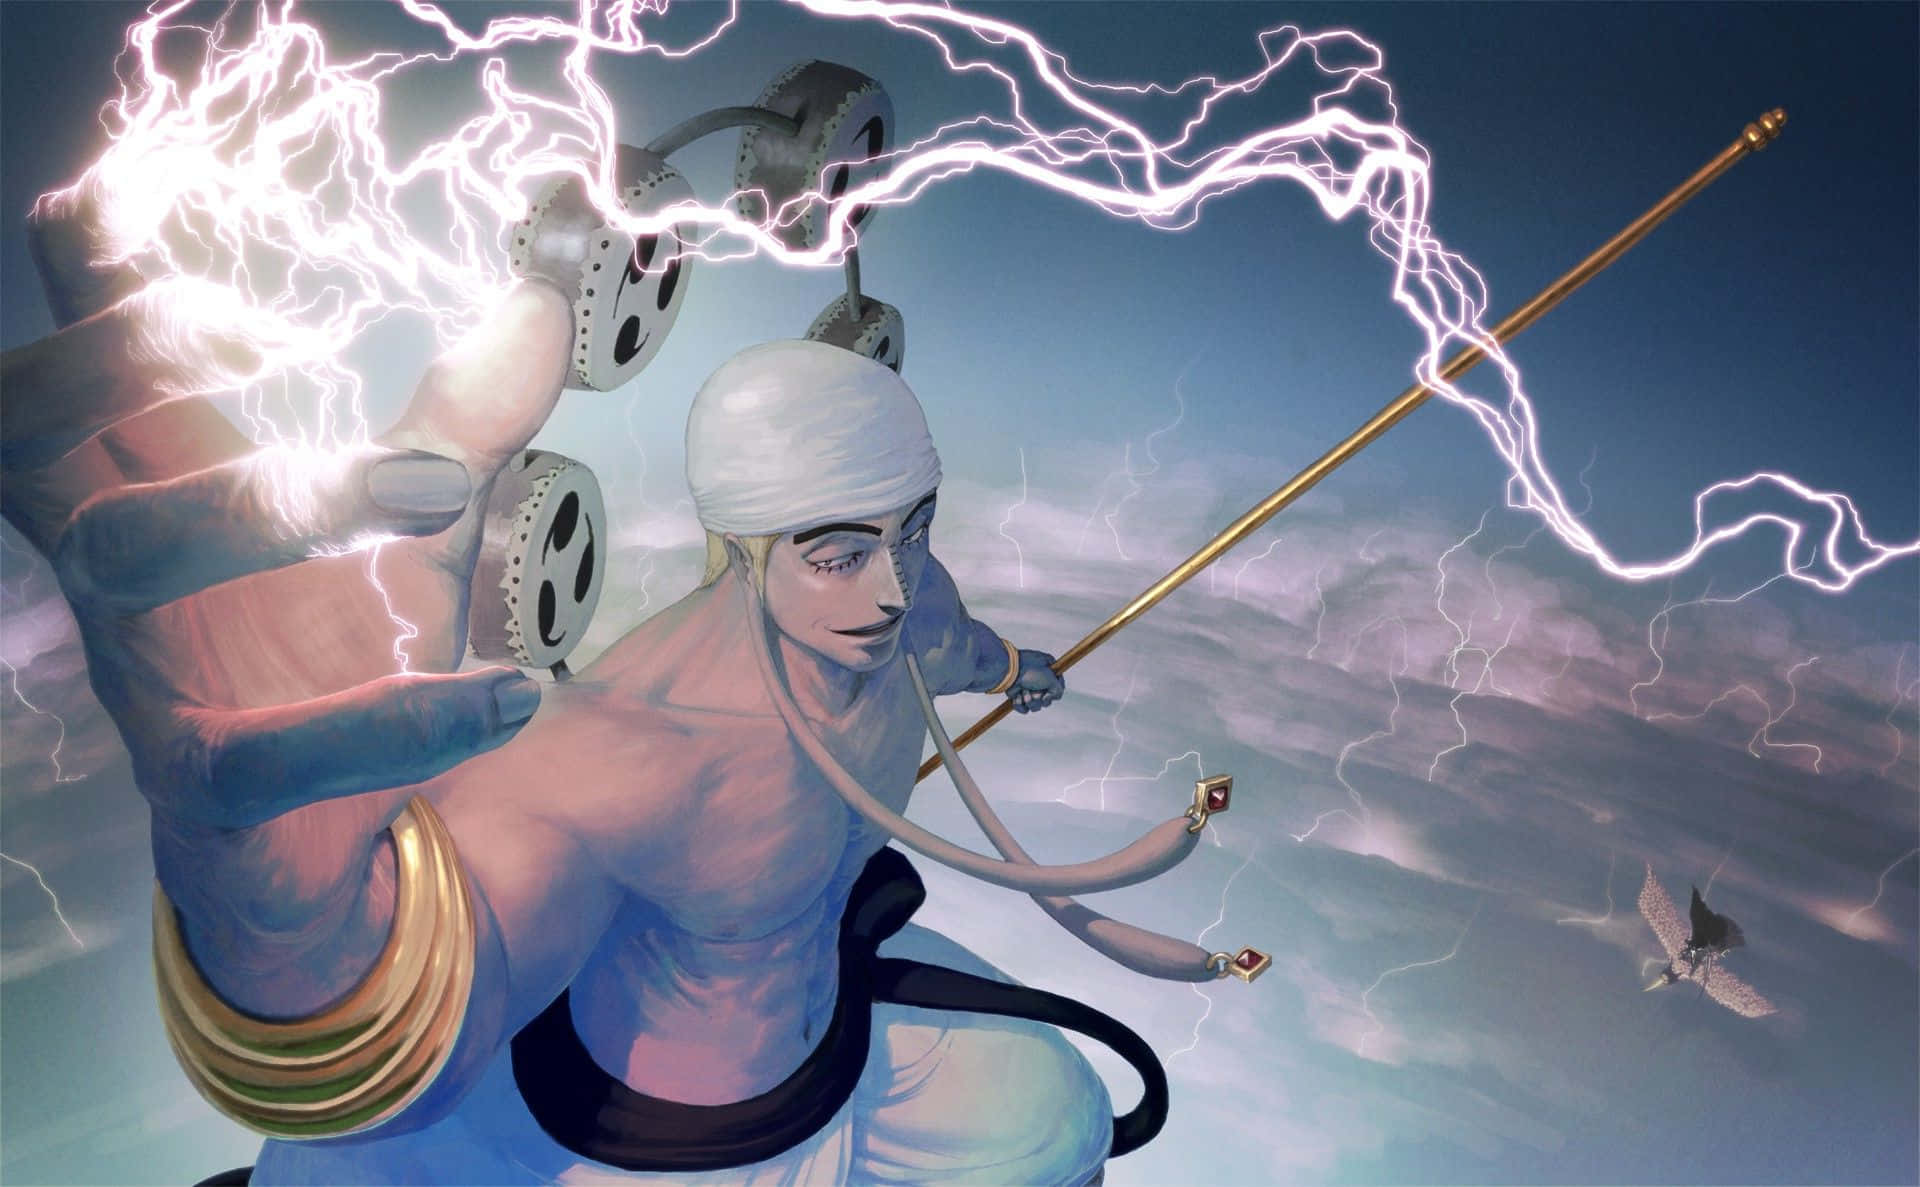 Enel, the Thunder God, reigning over the sky in One Piece Wallpaper